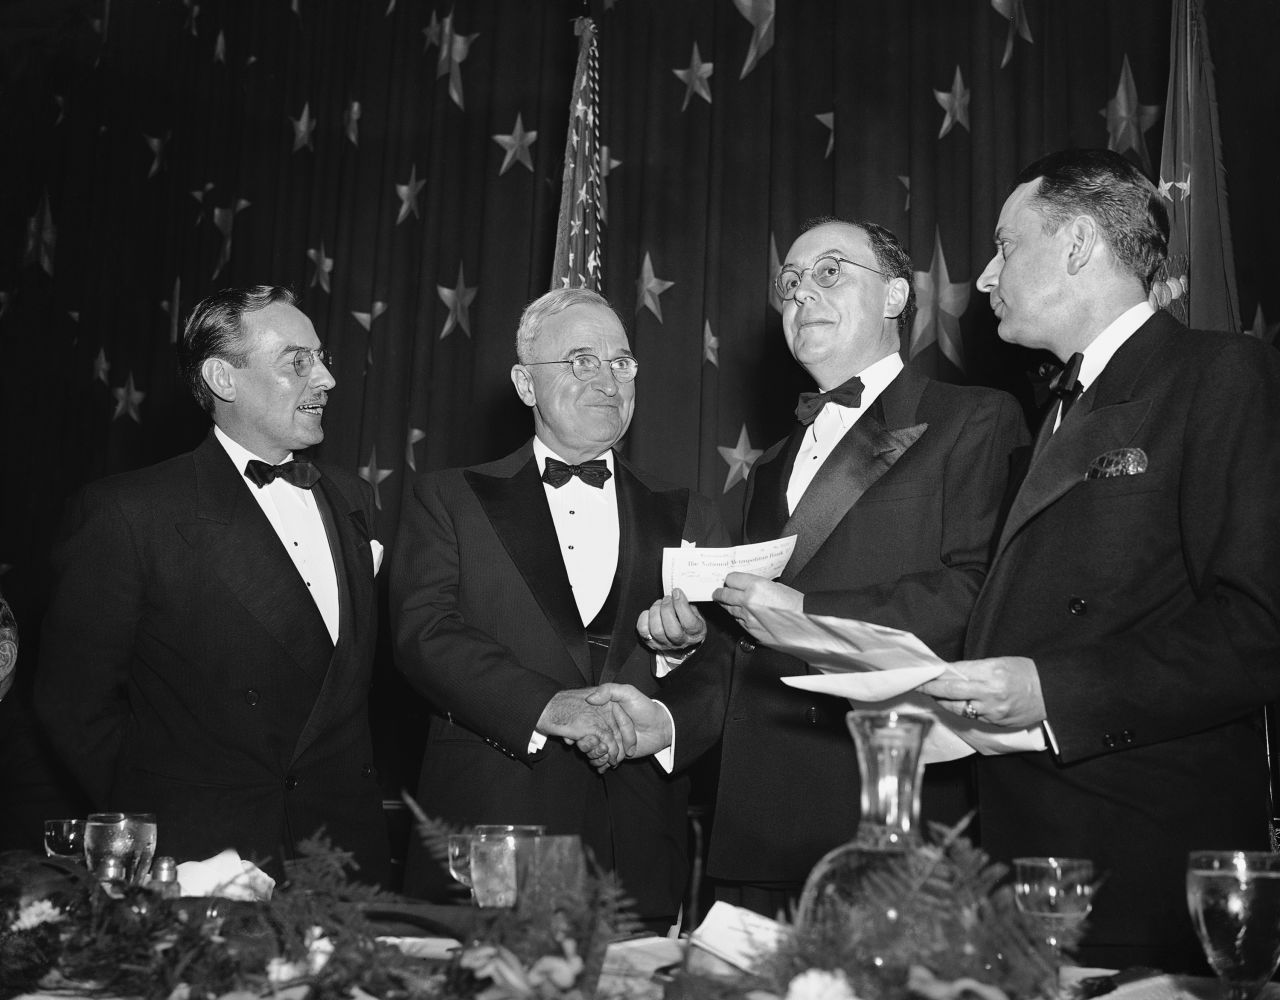 President Harry Truman, second from left, presents a $500 check to Peter Edson, second from right, for winning the Raymond Clapper Memorial Award in 1949.